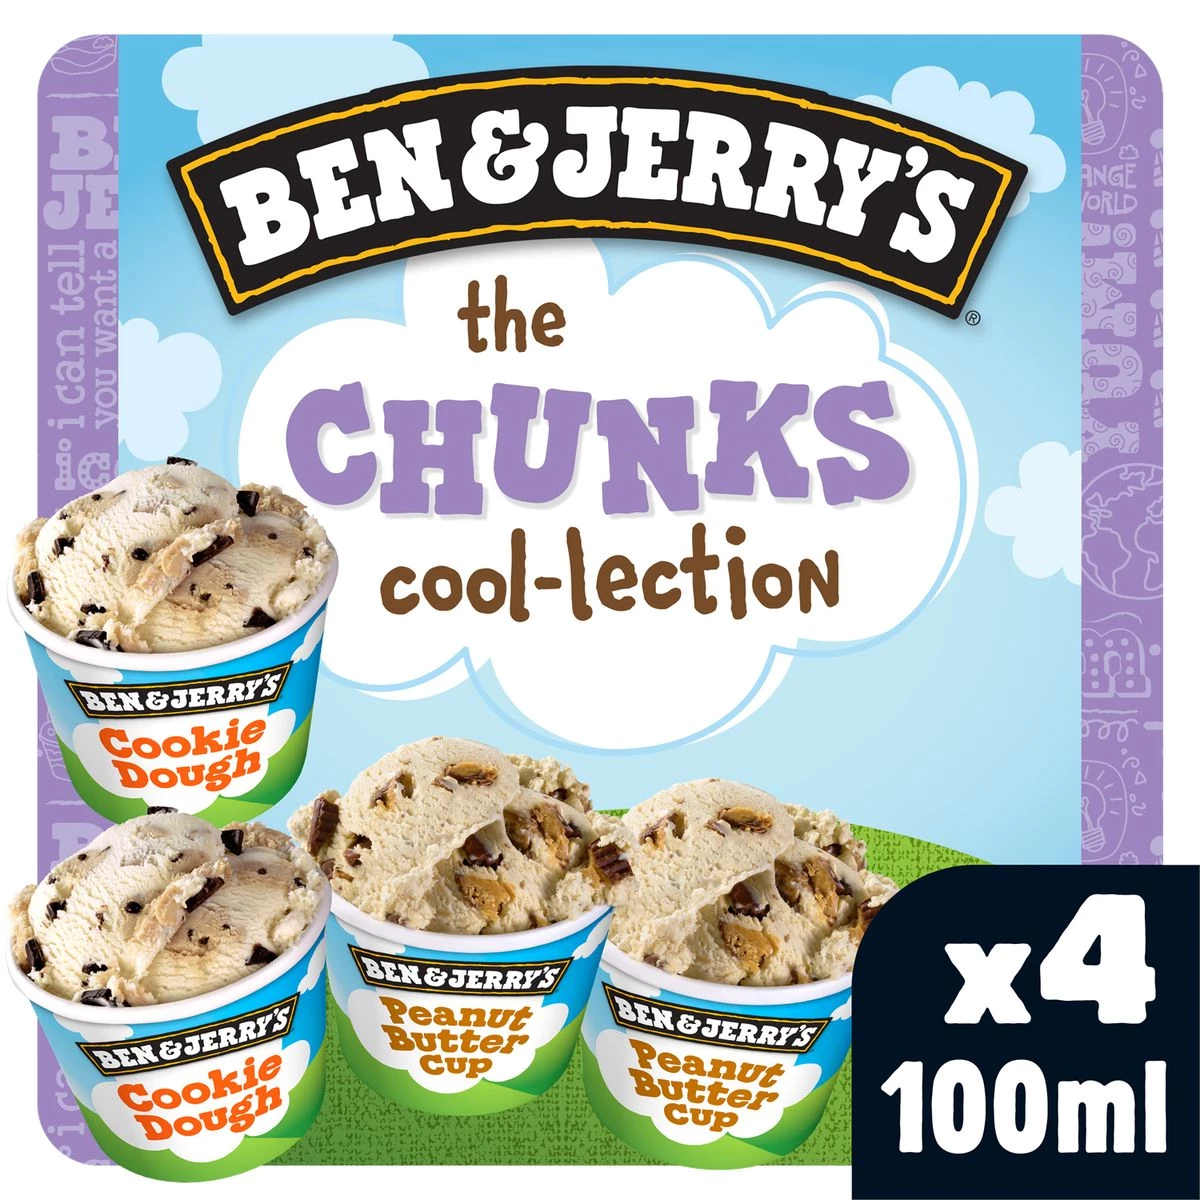 Glace the chunks cool-lection 4x100ml - BEN & JERRY'S